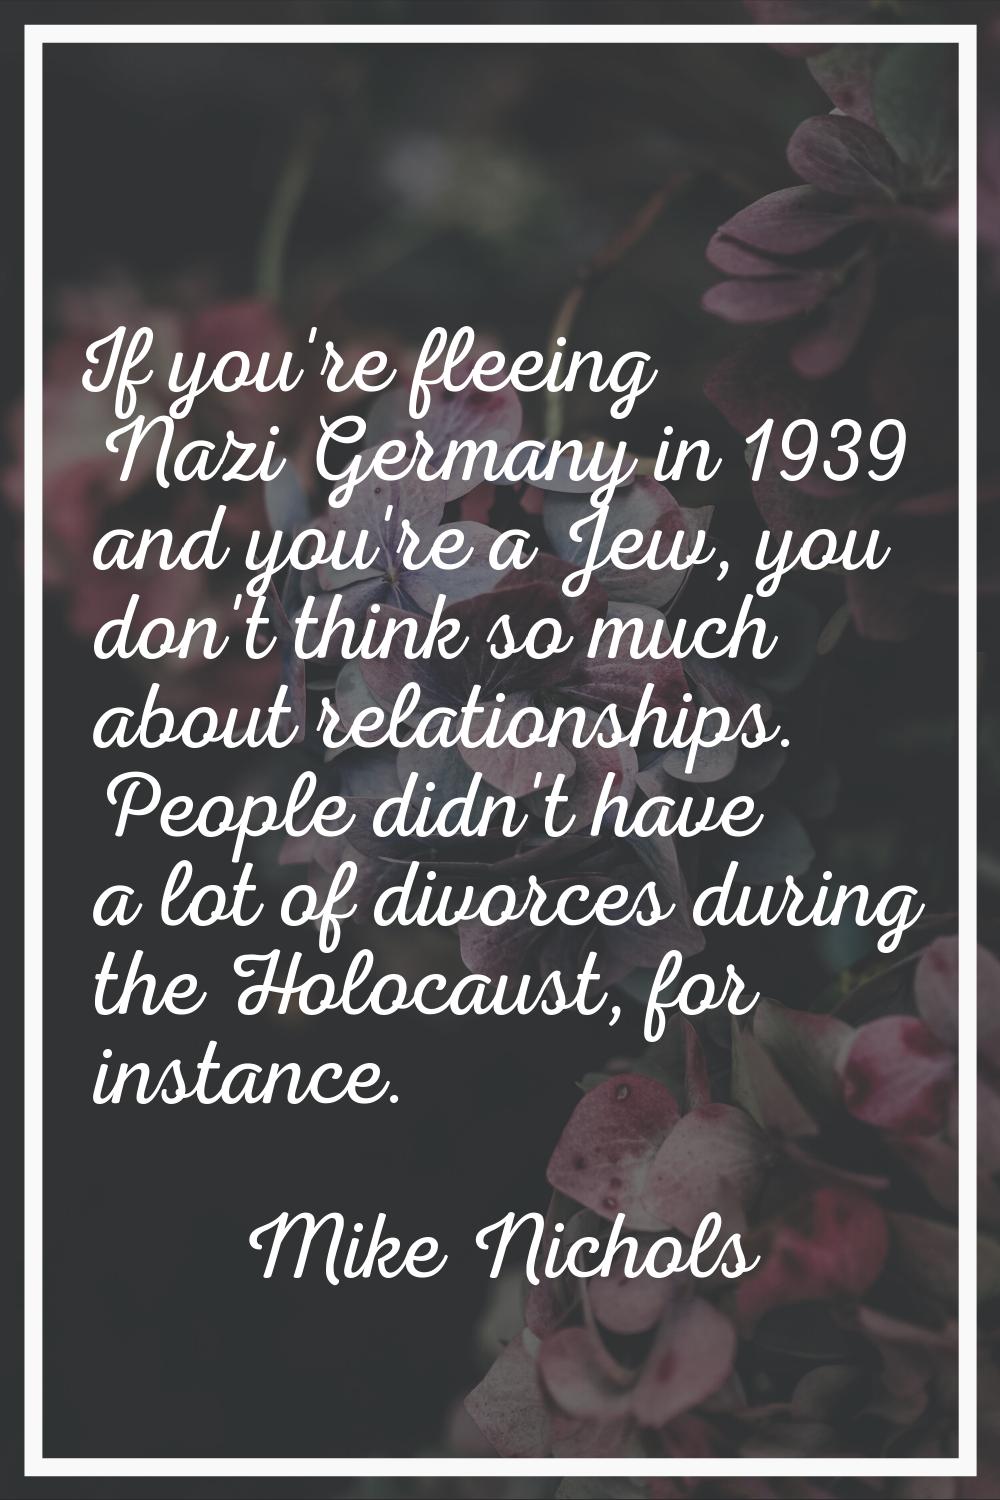 If you're fleeing Nazi Germany in 1939 and you're a Jew, you don't think so much about relationship